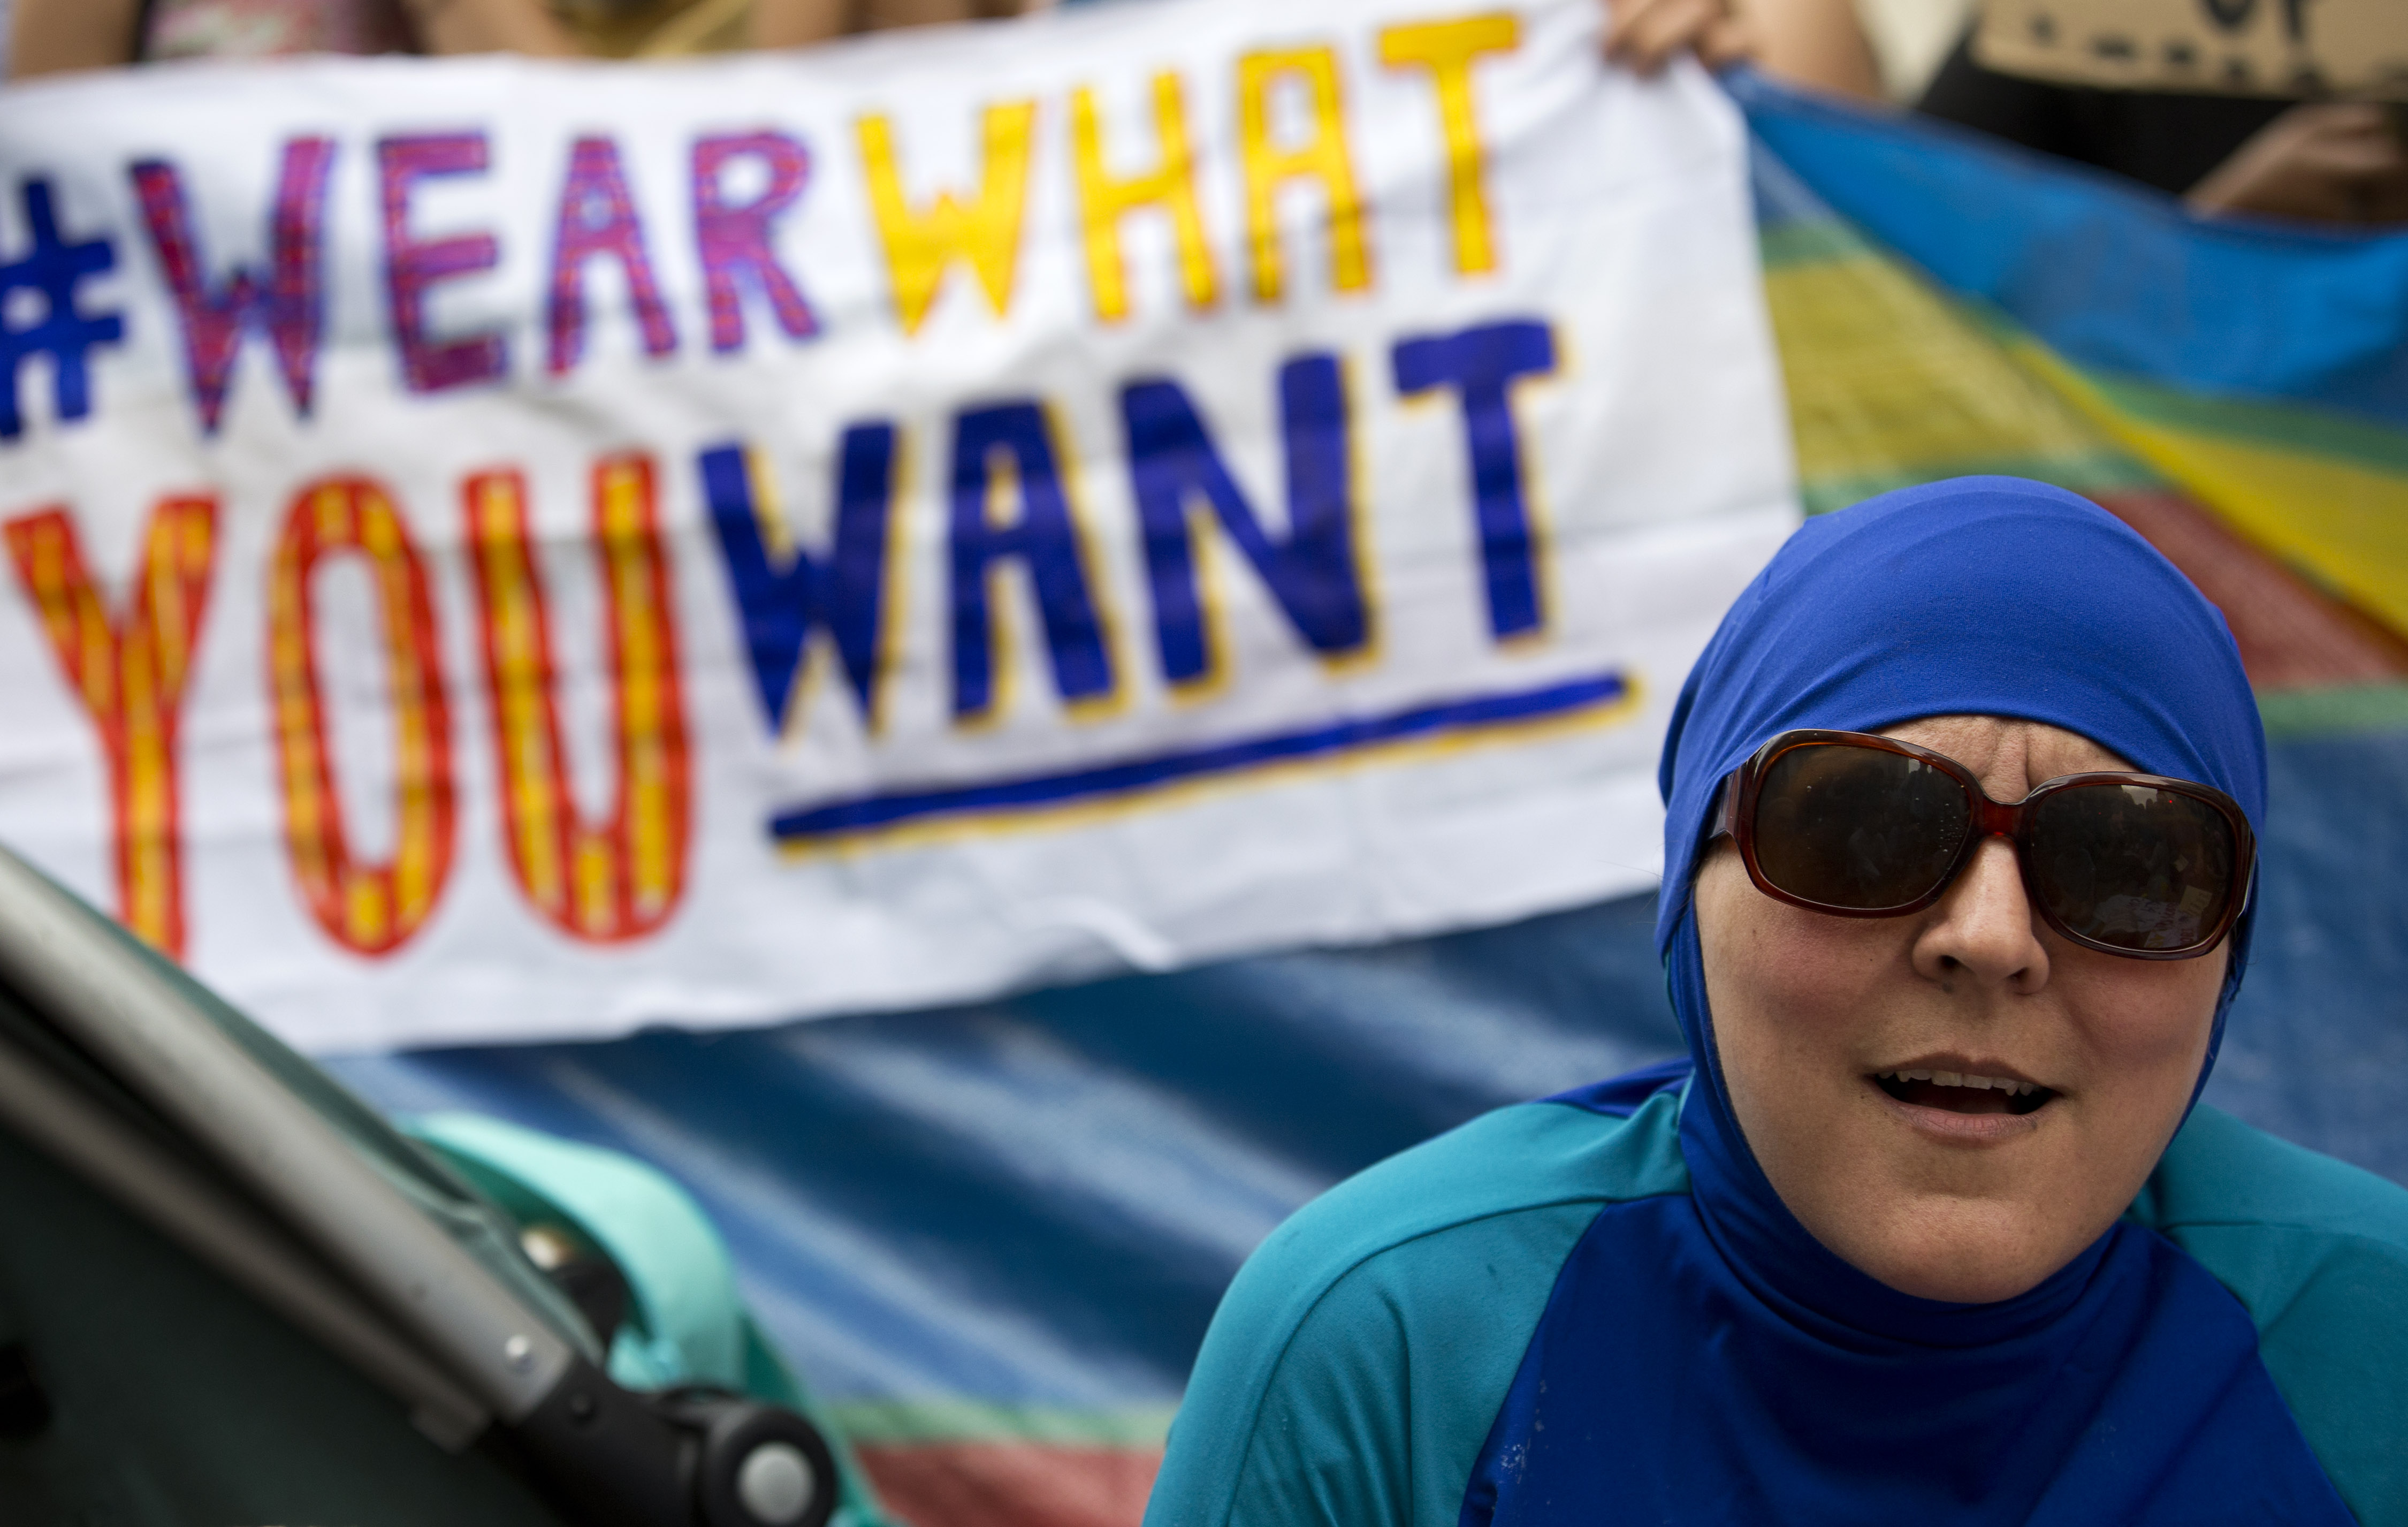 A woman wearing a "Burkini" joins a protest outside the French Embassy in London on August 25, 2016, during a "Wear what you want beach party" to demonstrate against the ban on Burkinis on French beaches and to show solidarity with Muslim women. French Interior Minister Bernard Cazeneuve warned Wednesday against stigmatising Muslims, as a furore over the banning of burkinis grew with the emergence of pictures showing police surrounding a veiled woman on a beach.  Dozens of French towns and villages, mostly on the Cote d'Azur, have banned beachwear that "conspicuously" shows a person's religion -- a measure aimed at the full-body Islamic swimsuit but which has also been used against women wearing long clothes and a headscarf. / AFP PHOTO / JUSTIN TALLIS